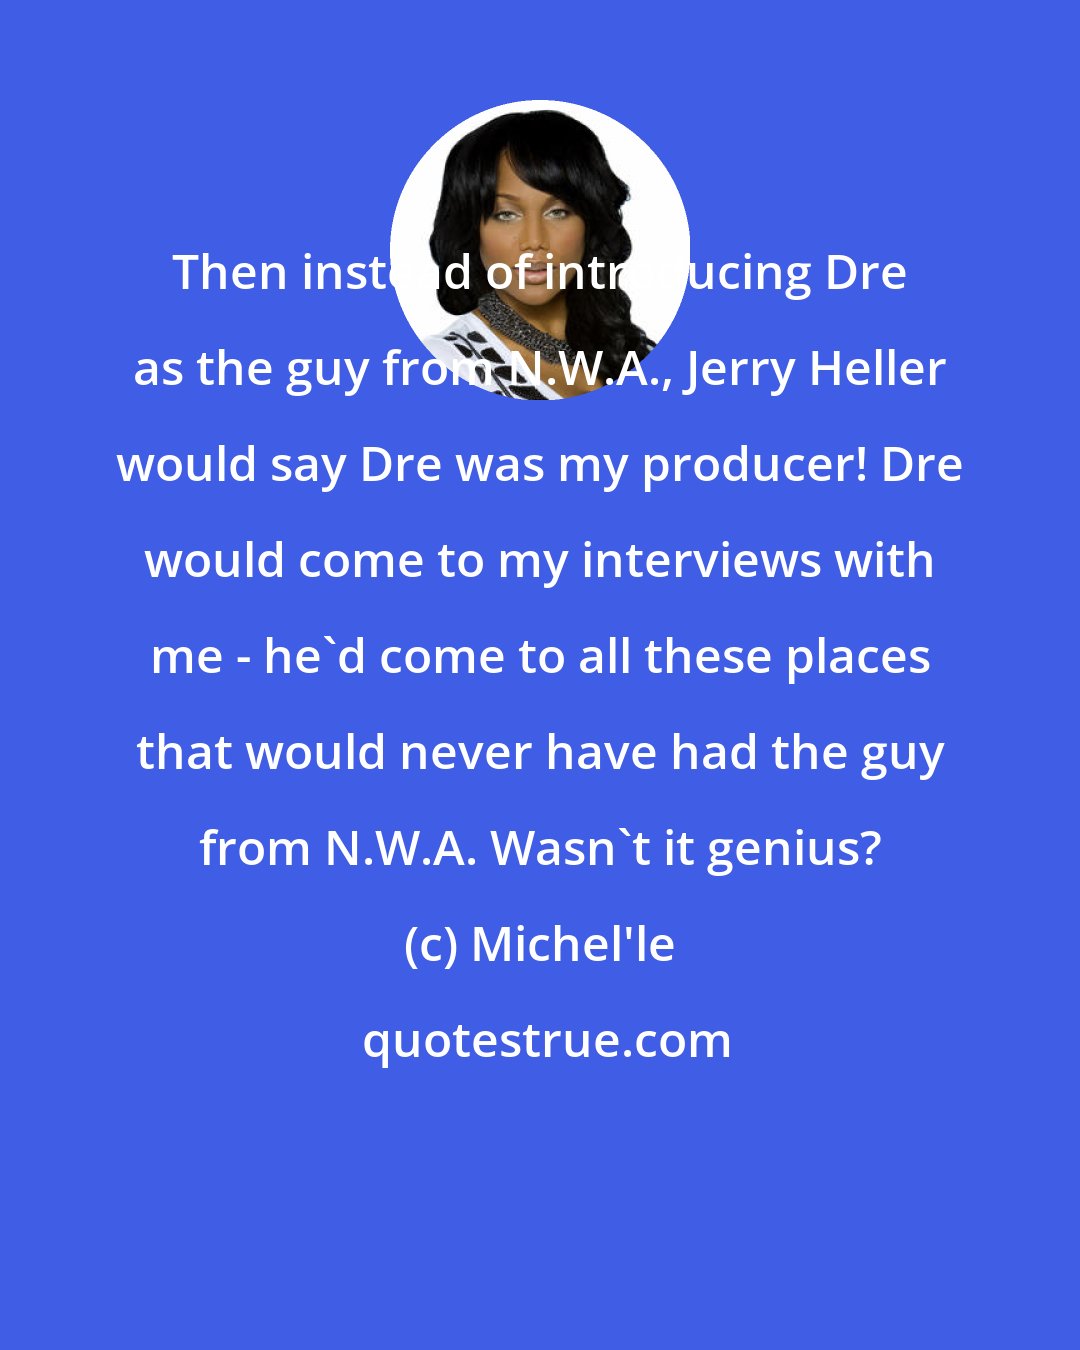 Michel'le: Then instead of introducing Dre as the guy from N.W.A., Jerry Heller would say Dre was my producer! Dre would come to my interviews with me - he'd come to all these places that would never have had the guy from N.W.A. Wasn't it genius?